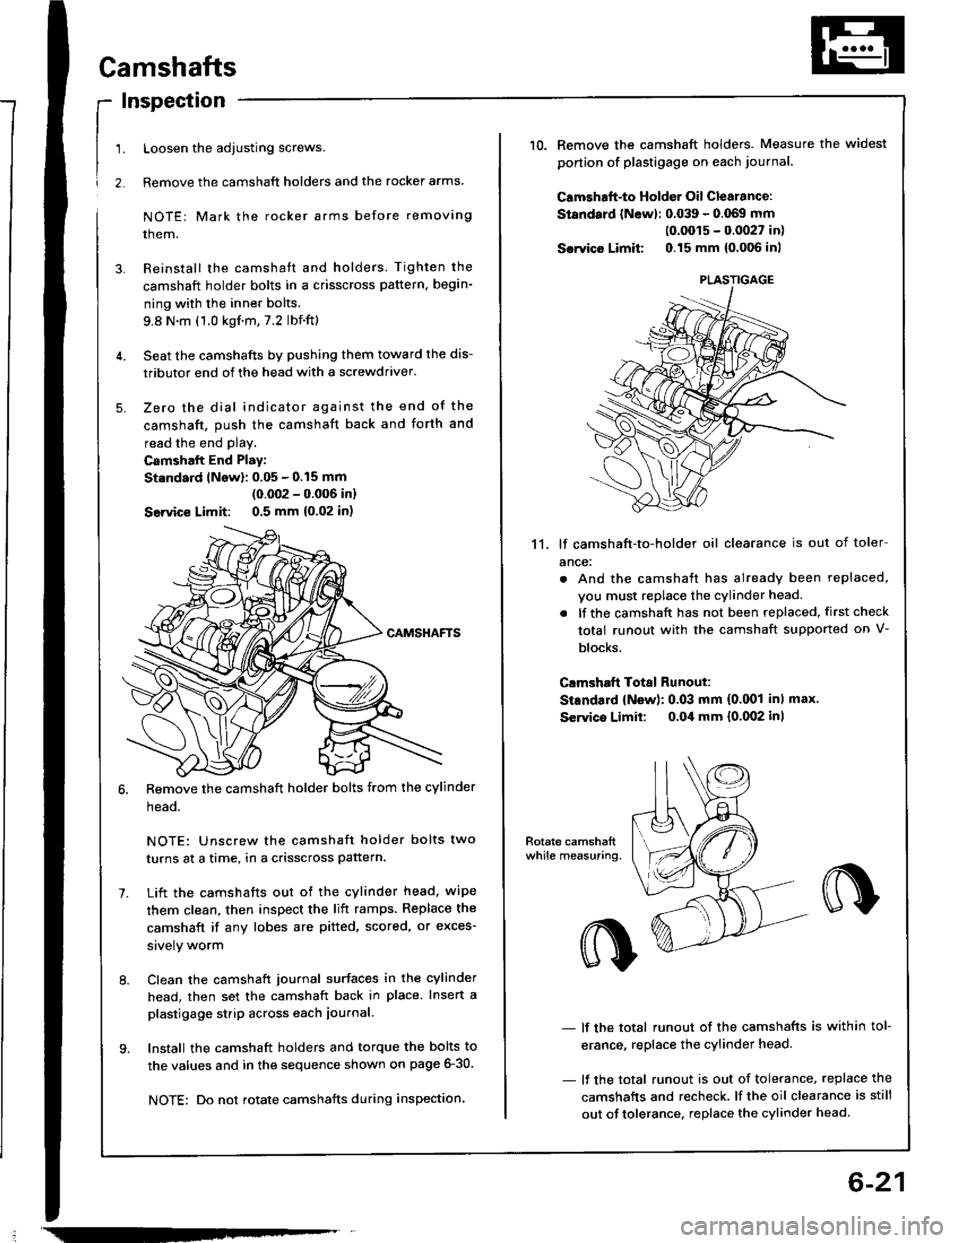 ACURA INTEGRA 1994  Service Repair Manual !
1.
2.
Camshafts
Inspection
Loosen the adjusting screws.
Remove the camshaft holders and the rocker arms
NOTE: Mark the rocker arms before removing
them.
Reinstall the camshaft and holders. Tighten t